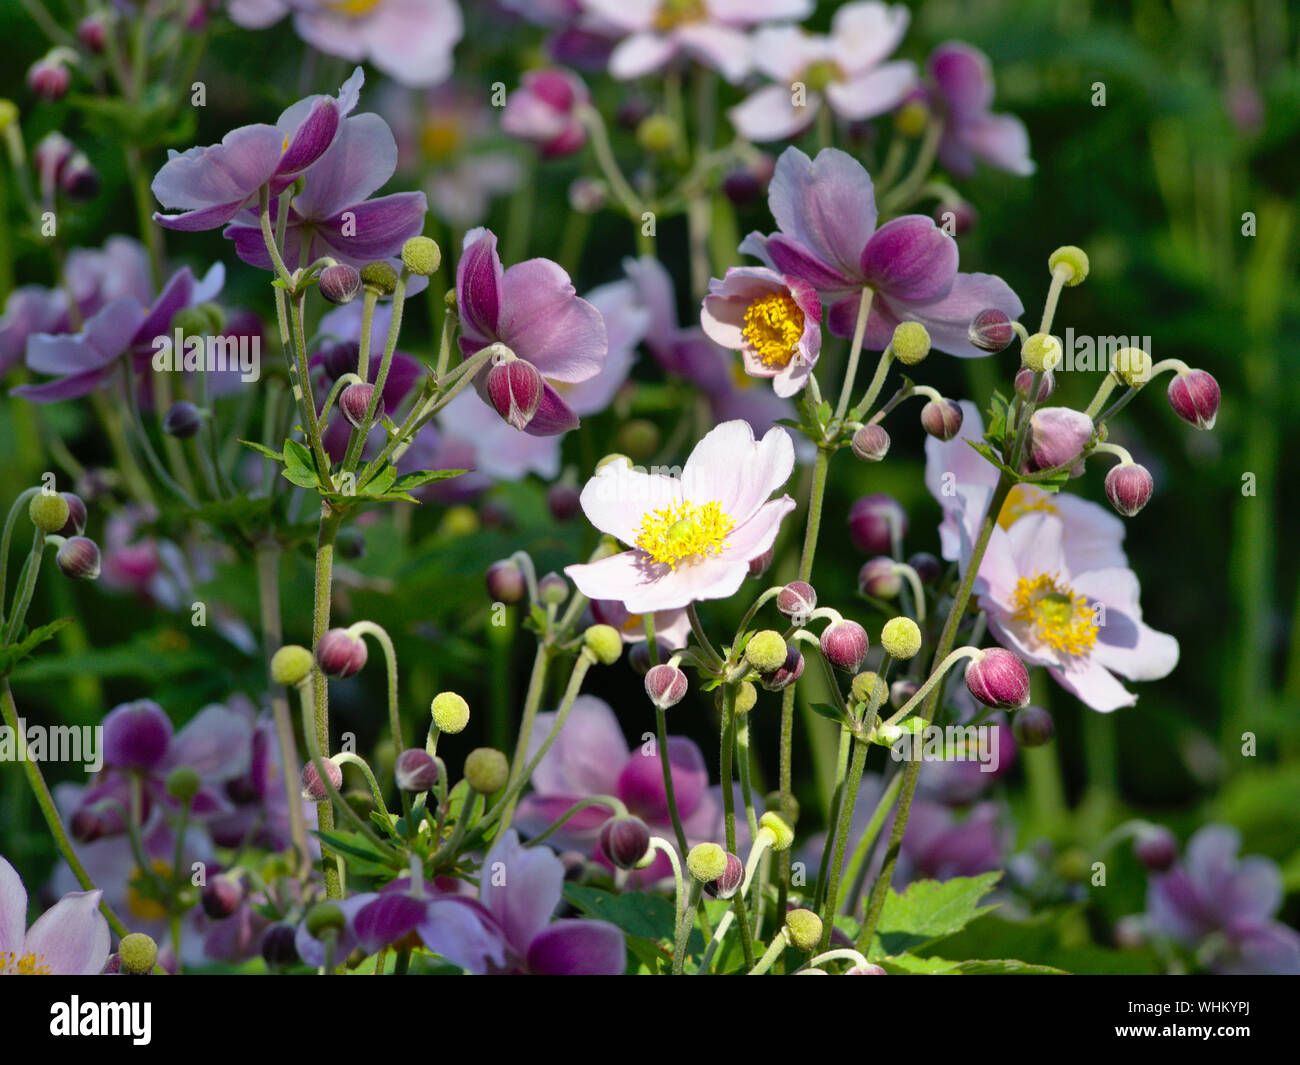 Pink Japanese anemone (Anemone hupehensis) flowers and seedheads basking in the late afternoon summer sun, Ottawa, Ontario, Canada. Stock Photo